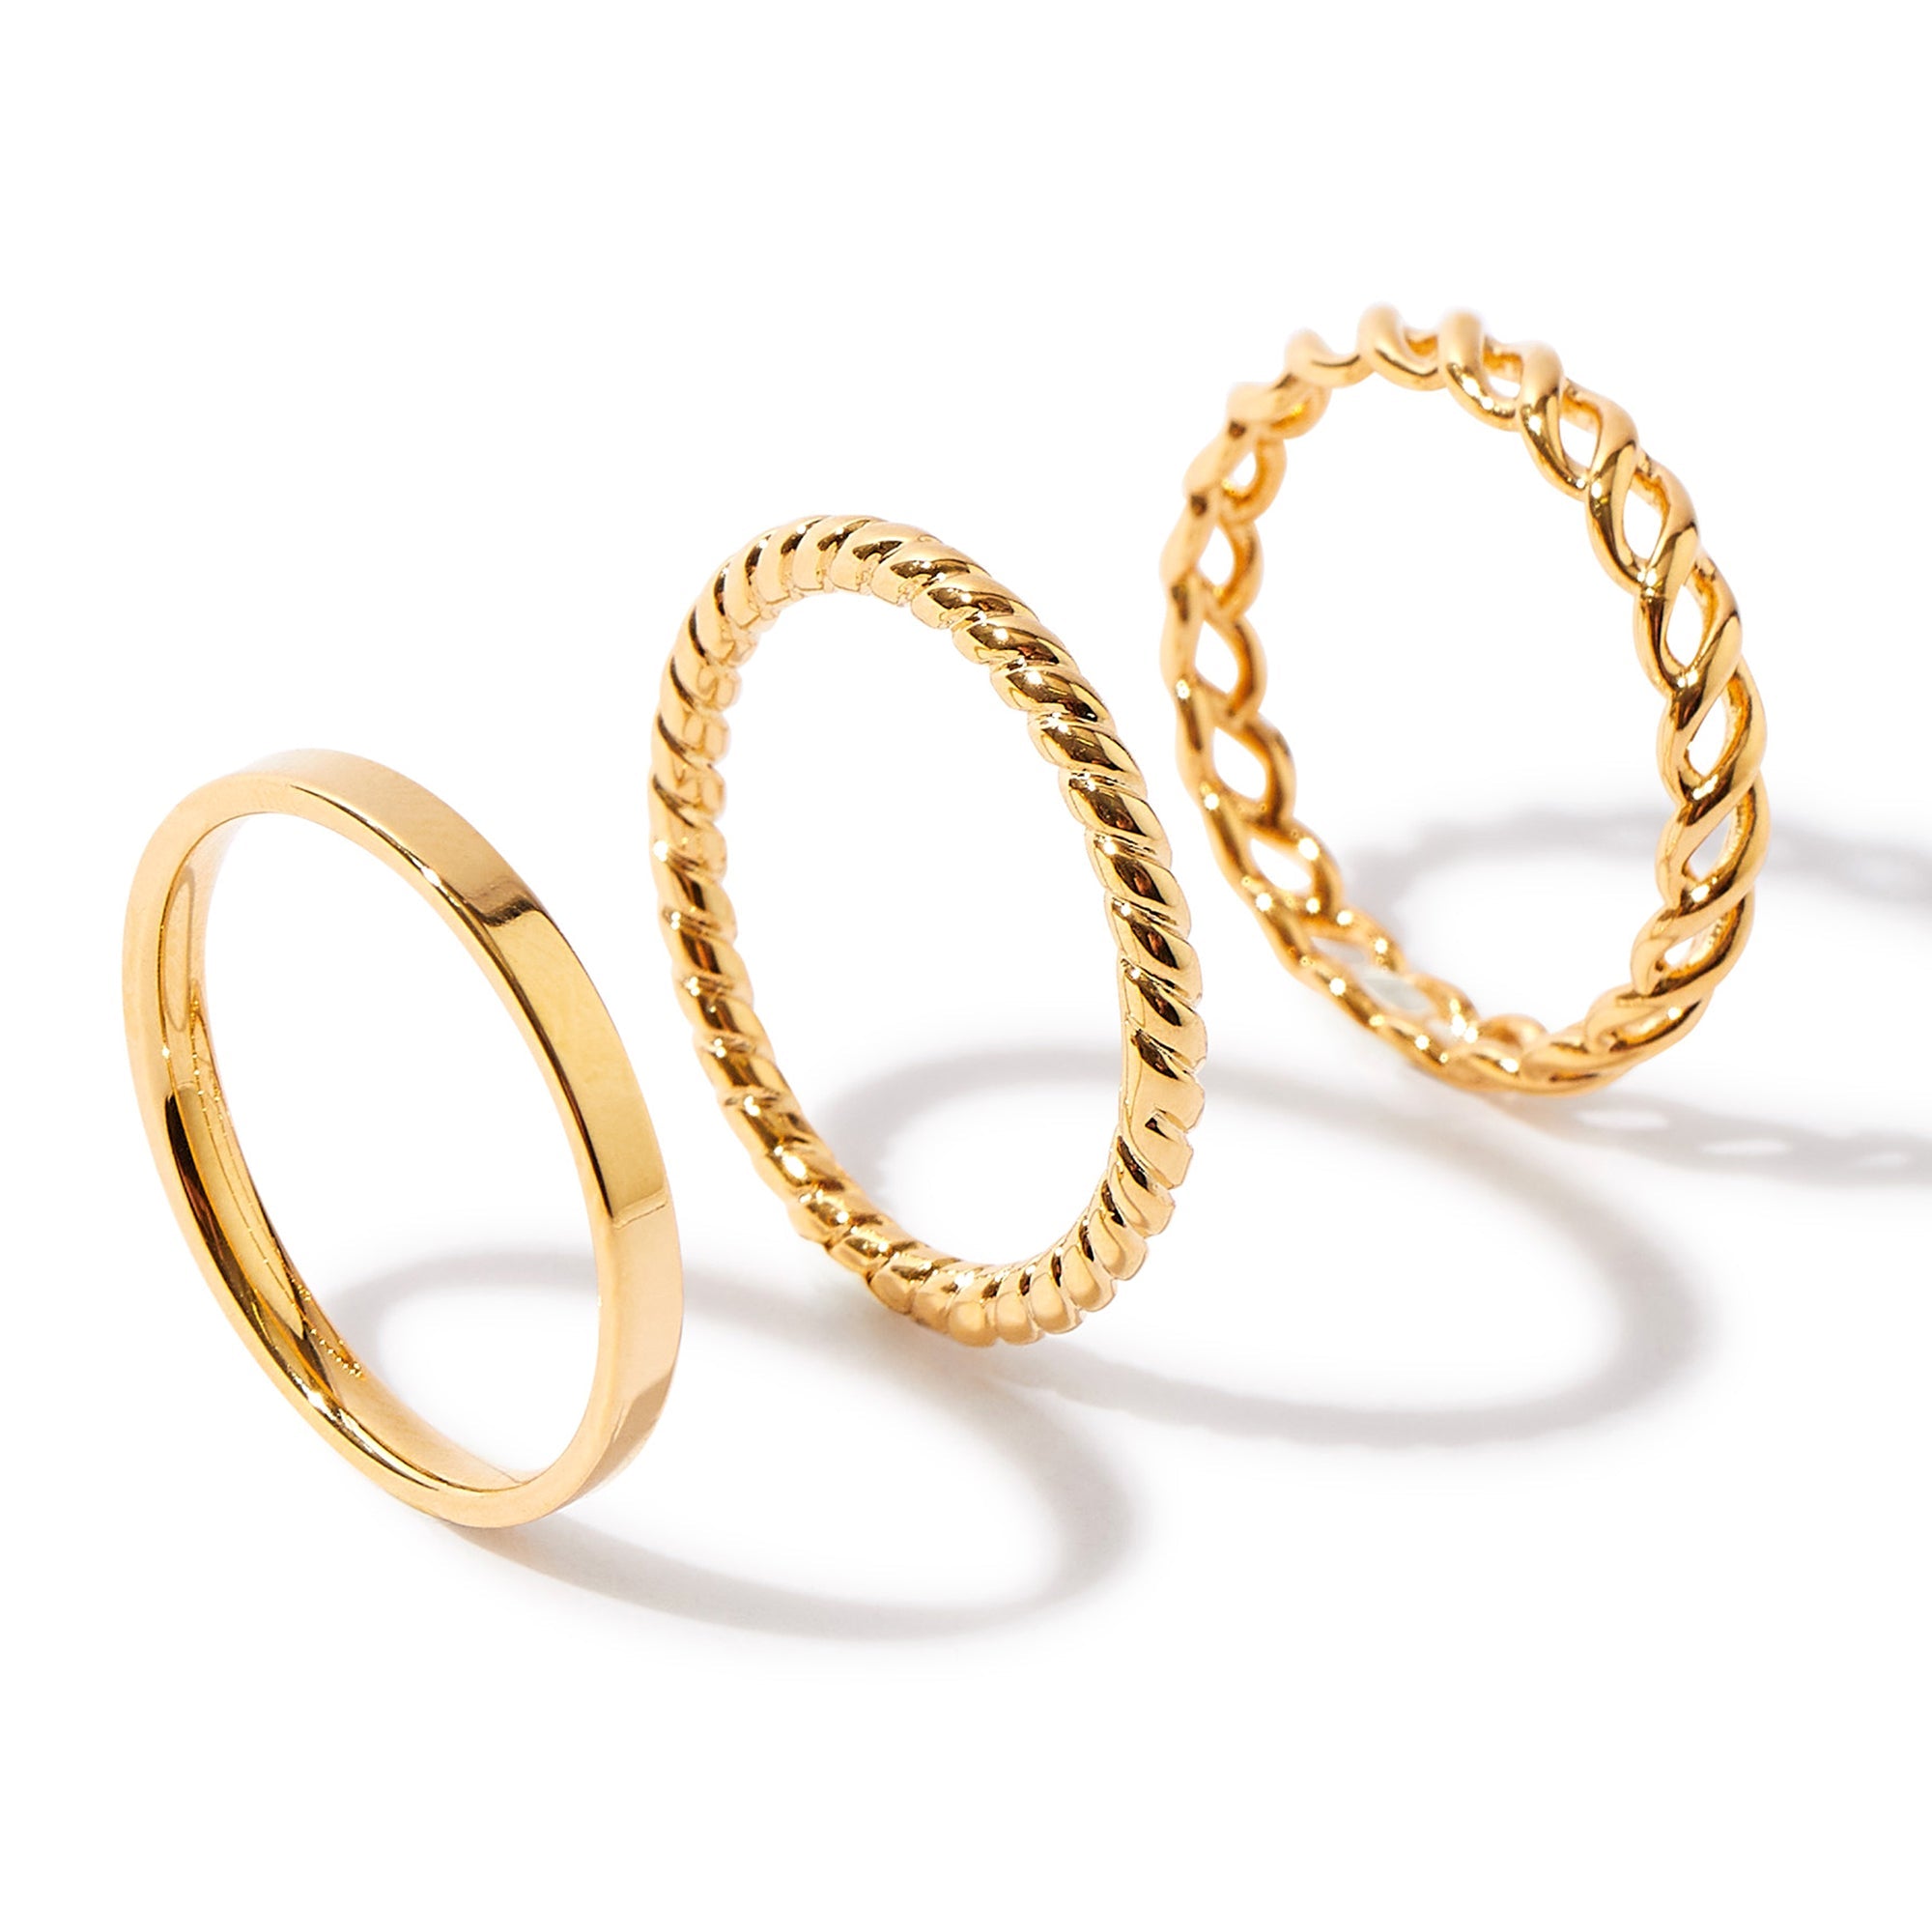 Real Gold Plated 3 Pack Band Stacking Rings For Women By Accessorize London Medium